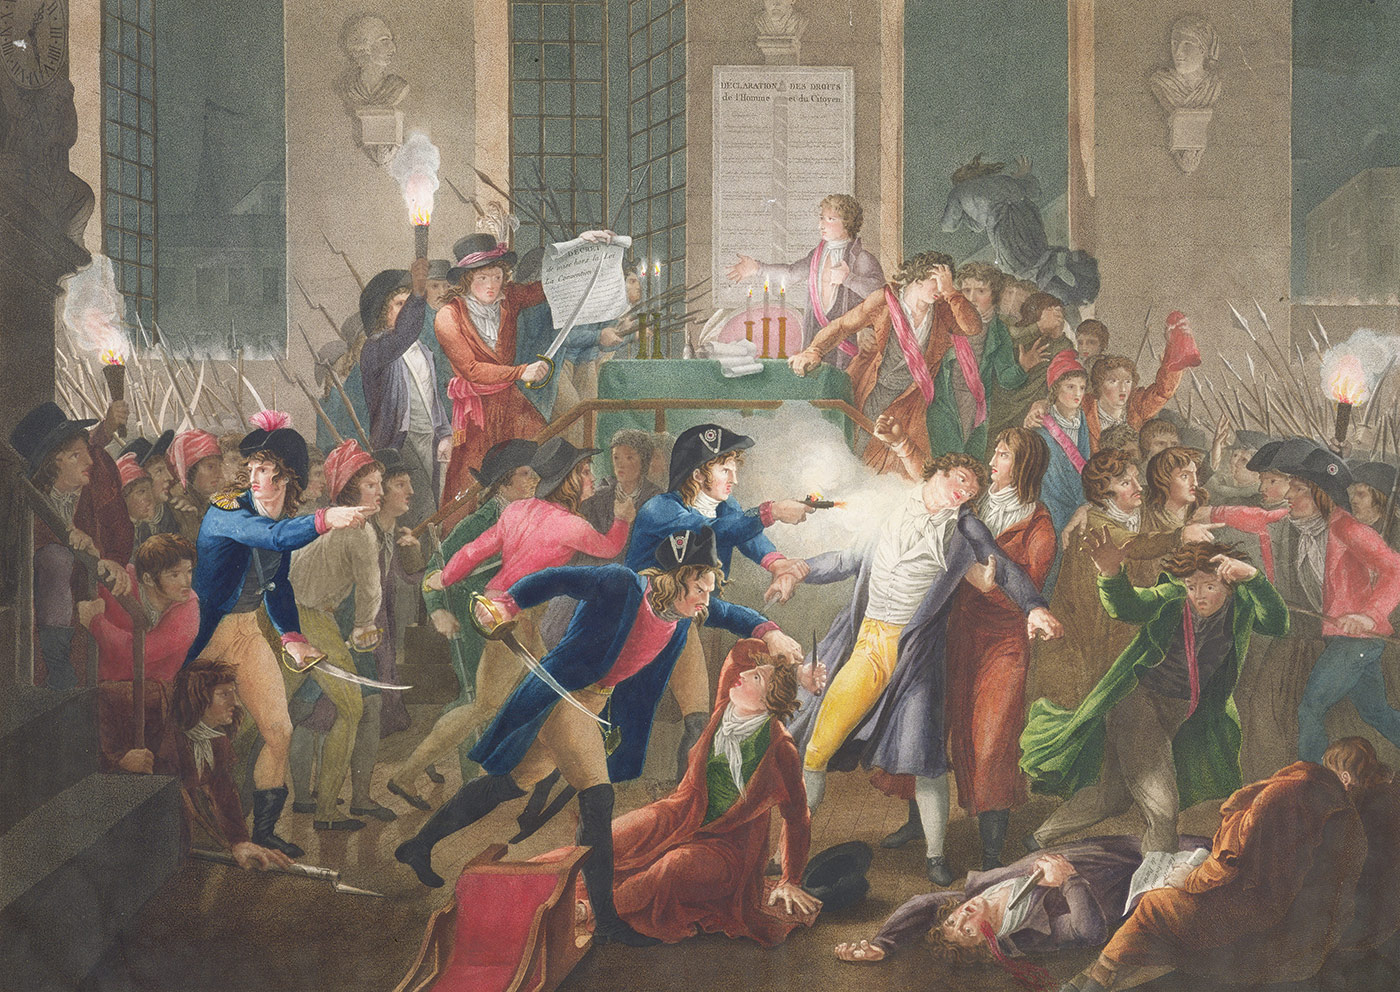 The arrest of Robespierre on the night of 9-10 Thermidor, Year Two by Jean-Joseph Tessaert. Musée Carnavalet / Bridgeman Images